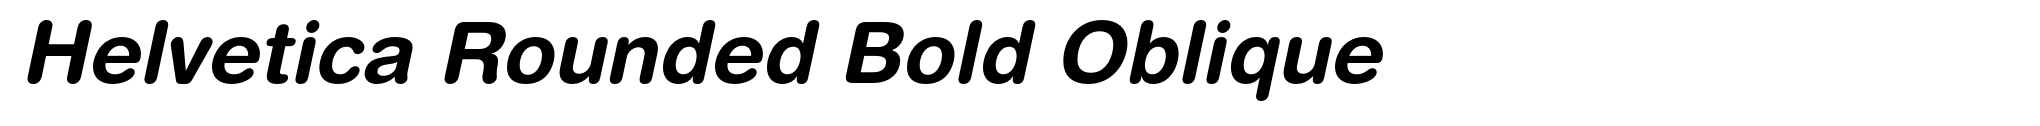 Helvetica Rounded Bold Oblique image